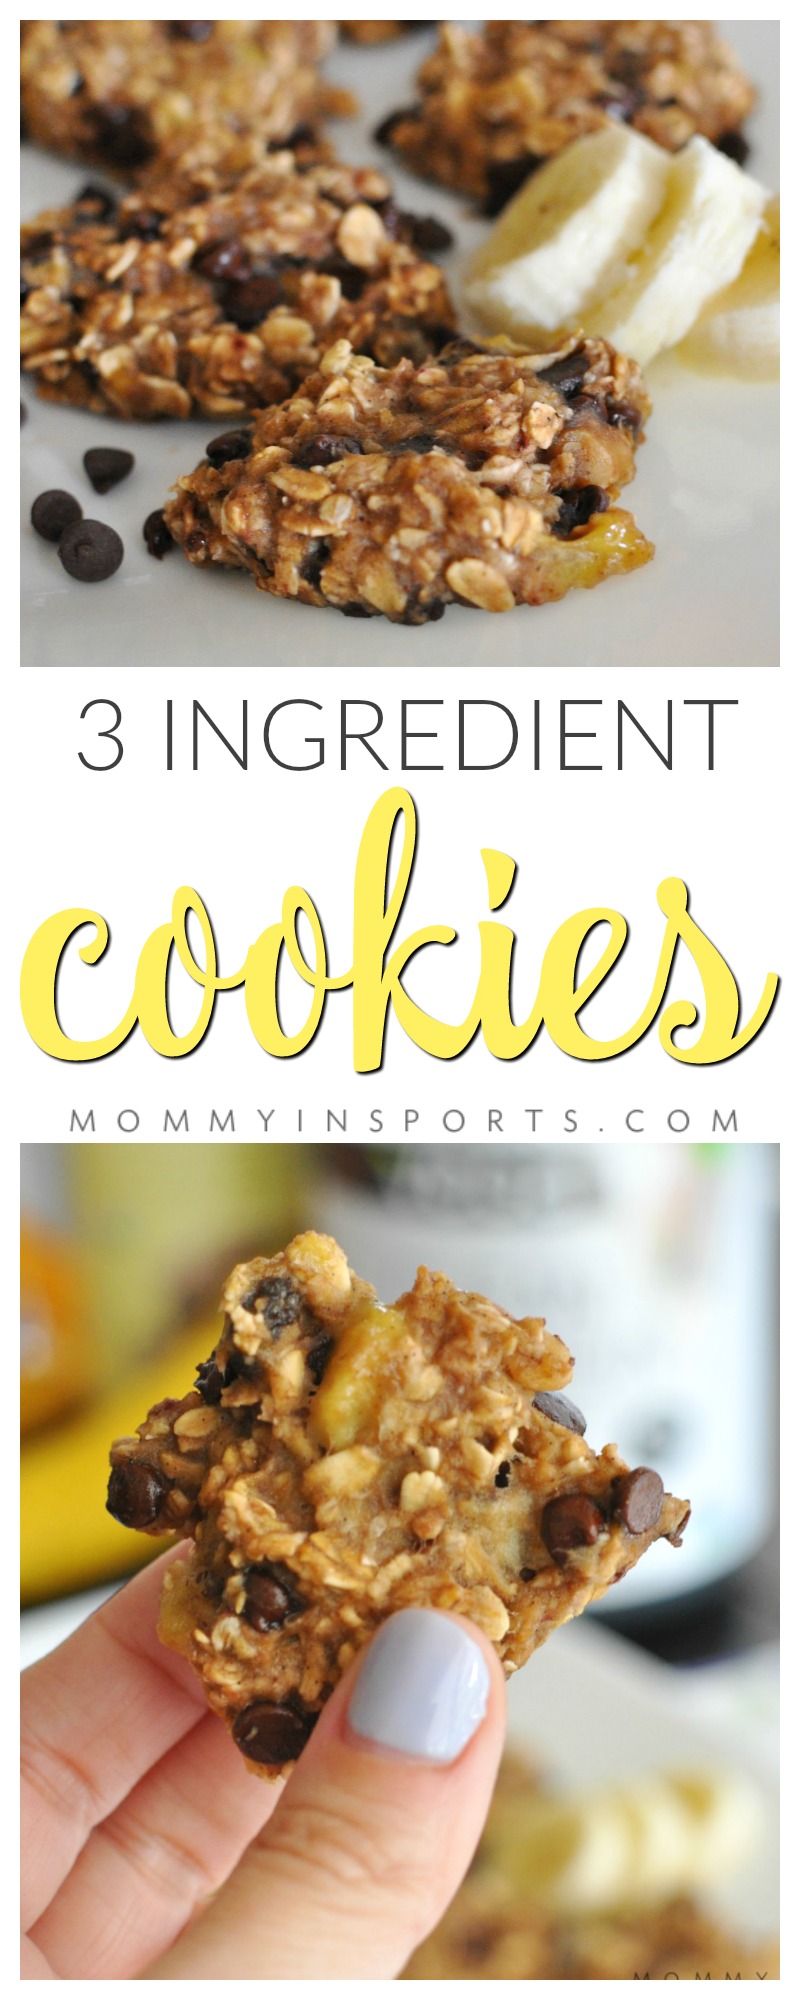 Looking for an easy recipe to make with the kids? Try these simple yet delish 3 ingredient cookies! No measuring, no mixers, no fuss!